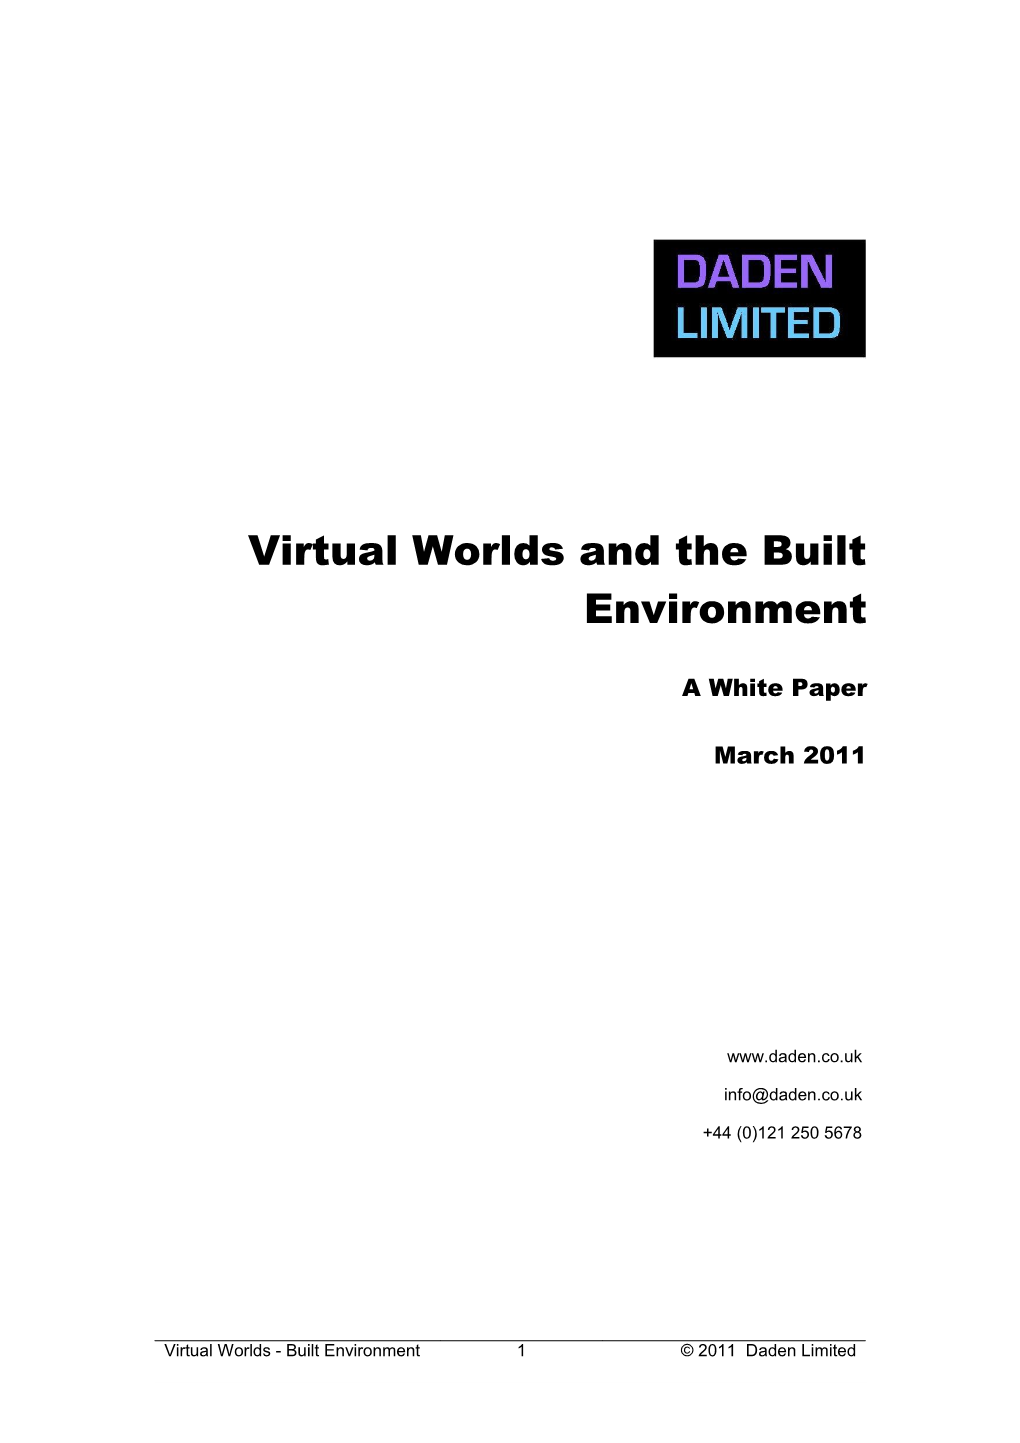 Virtual Worlds and the Built Environment